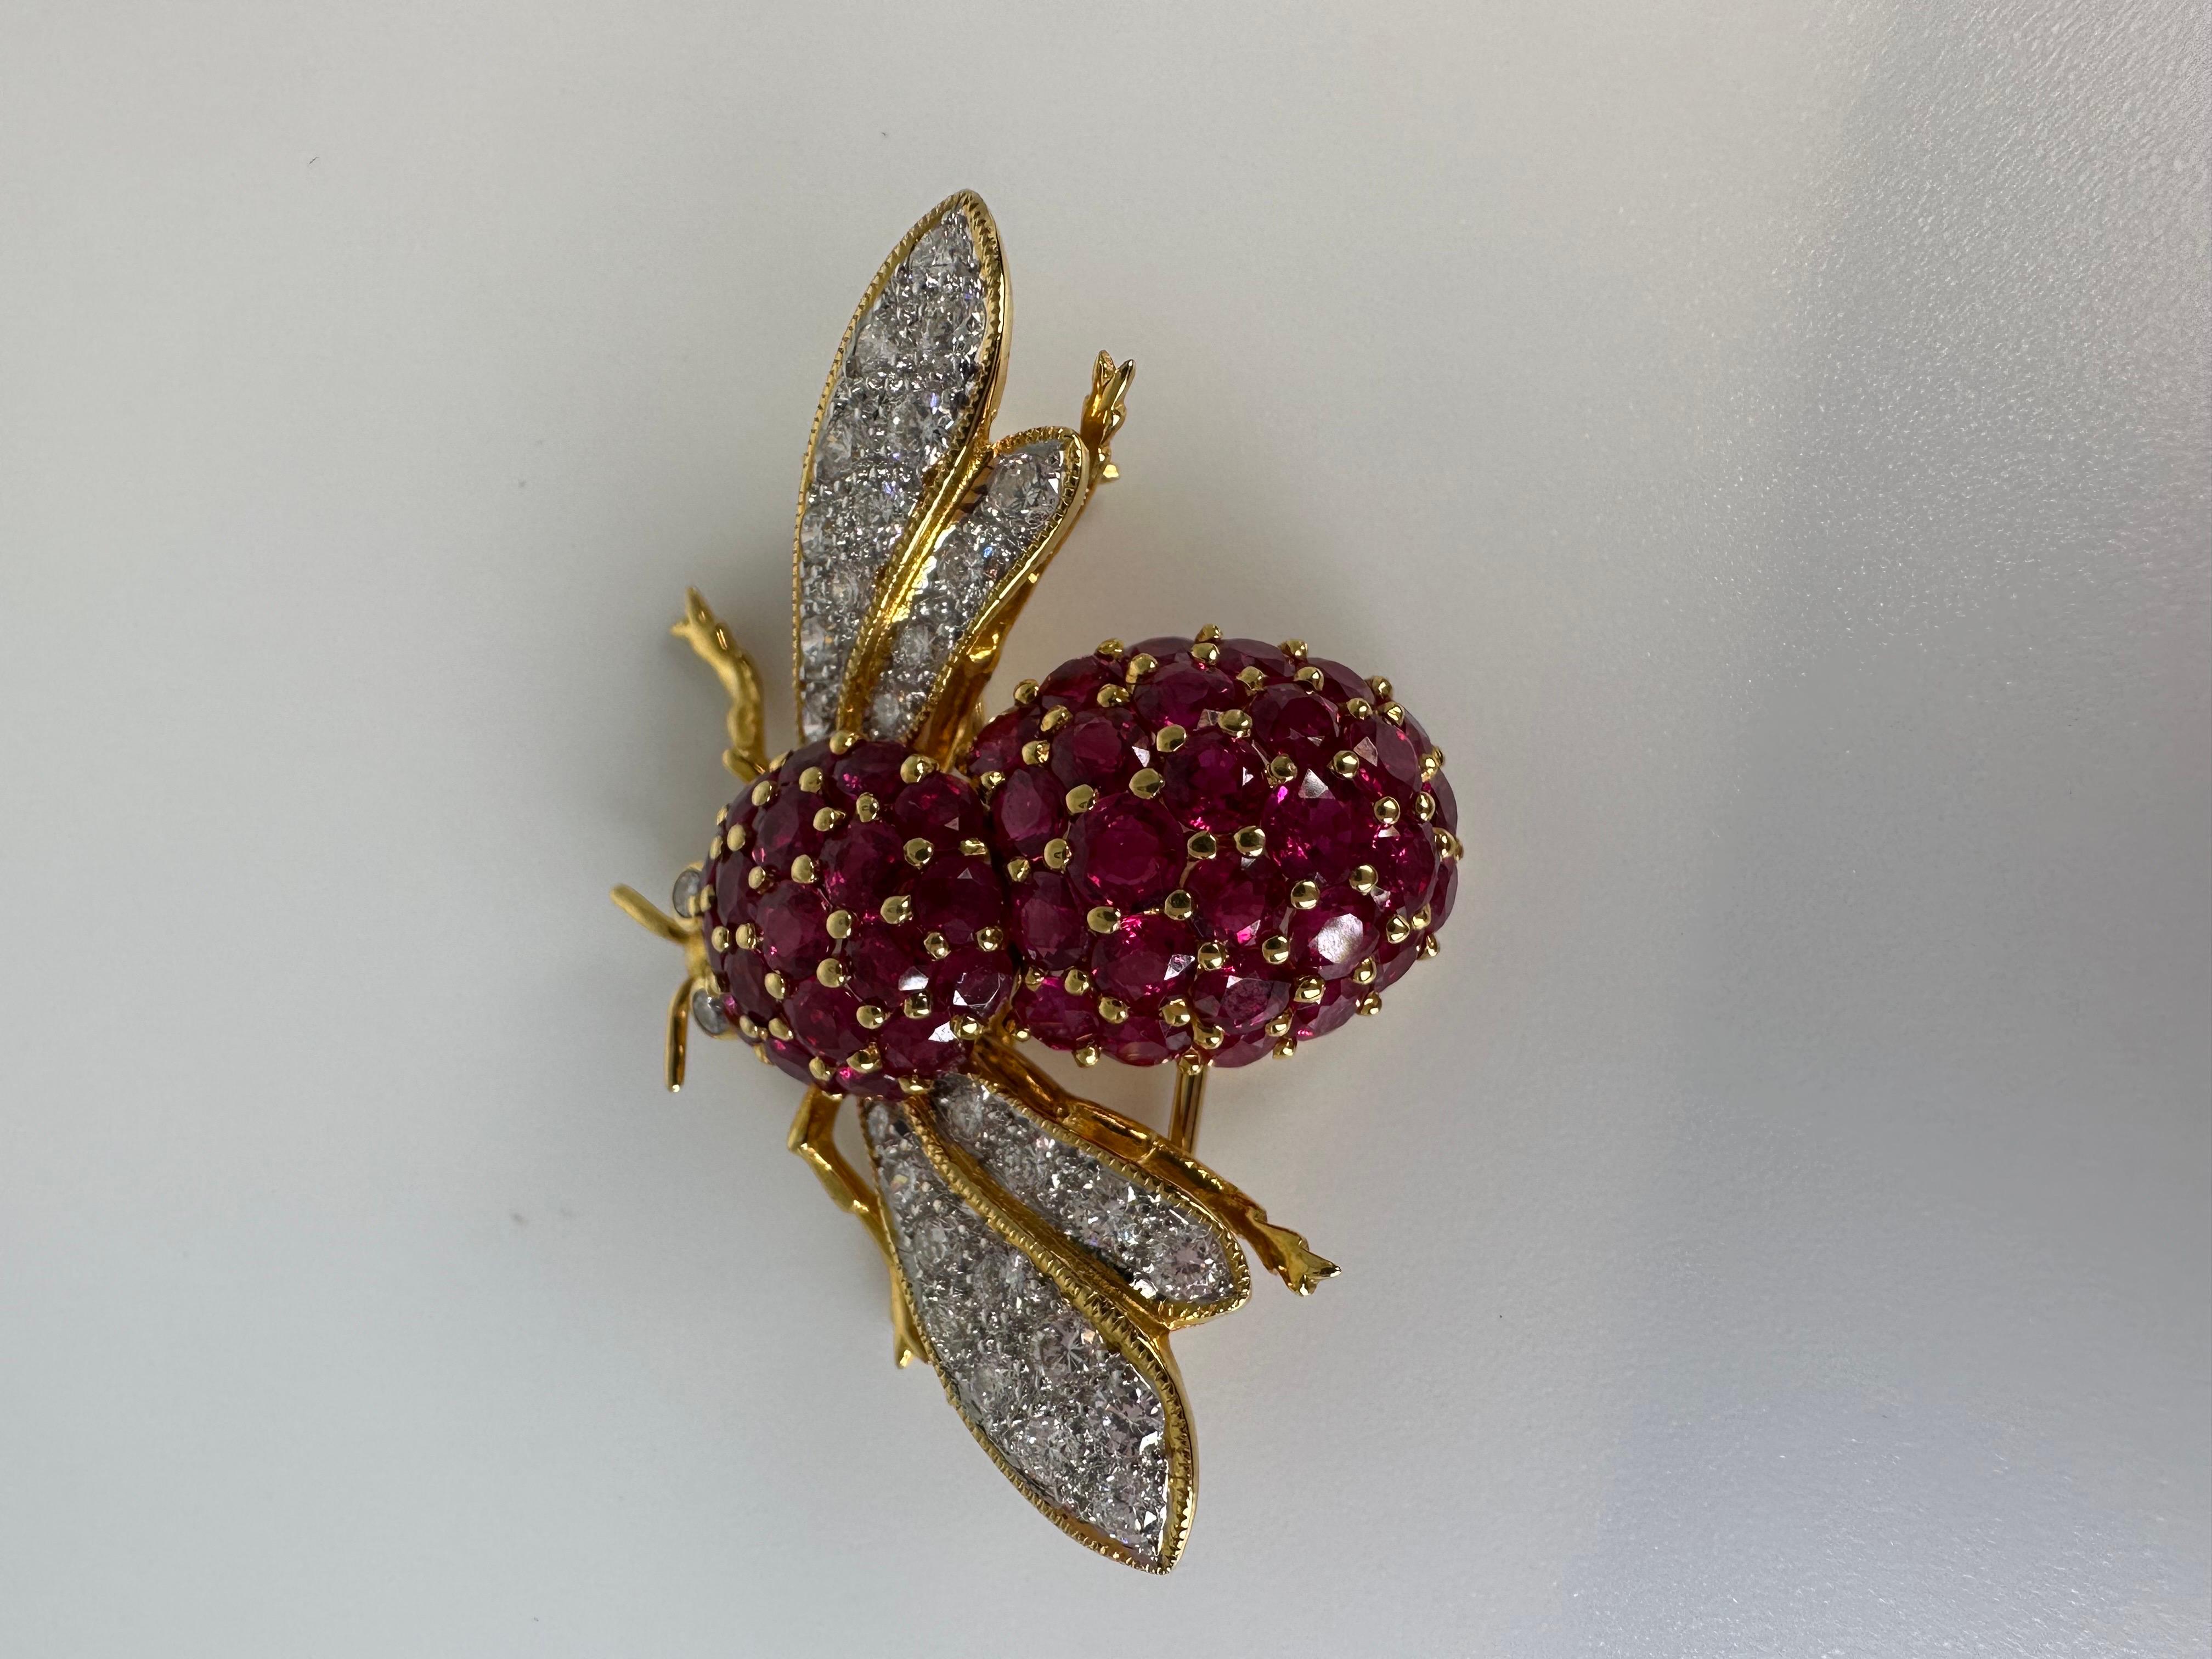 Untreared rubies, matching in that desired wine color pave set to perfection. This bee is not like any other made in 18KT yellow gold with top grade natural diamonds.

METAL: 18KT
NATURAL DIAMOND(S)
Clarity/Color: VS/F-G
Cut: Round